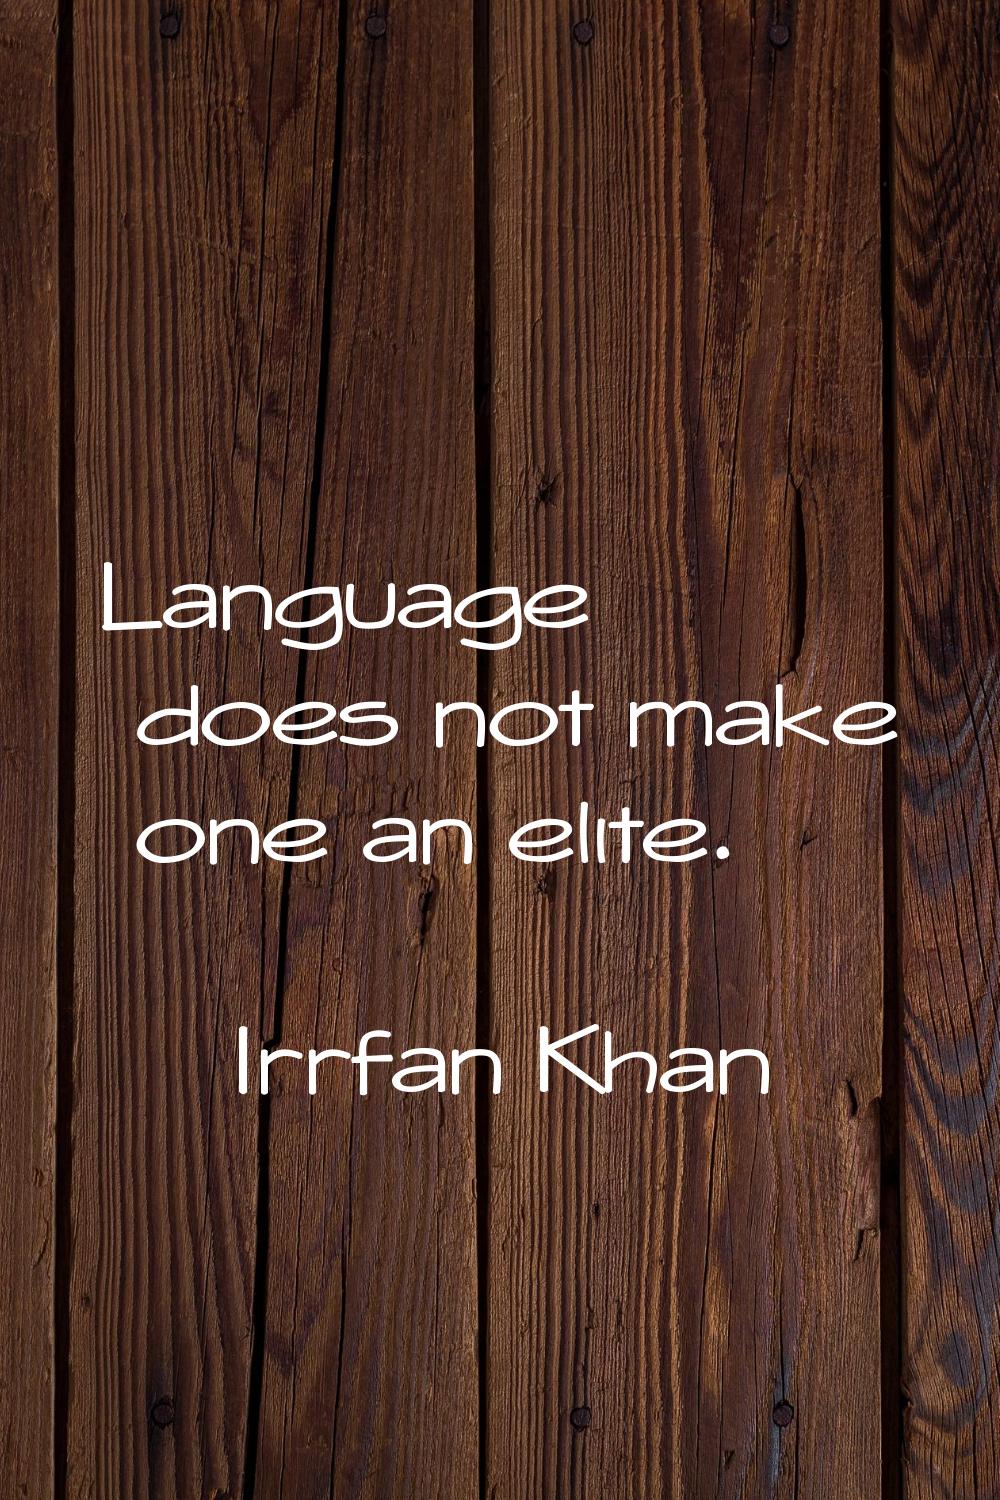 Language does not make one an elite.